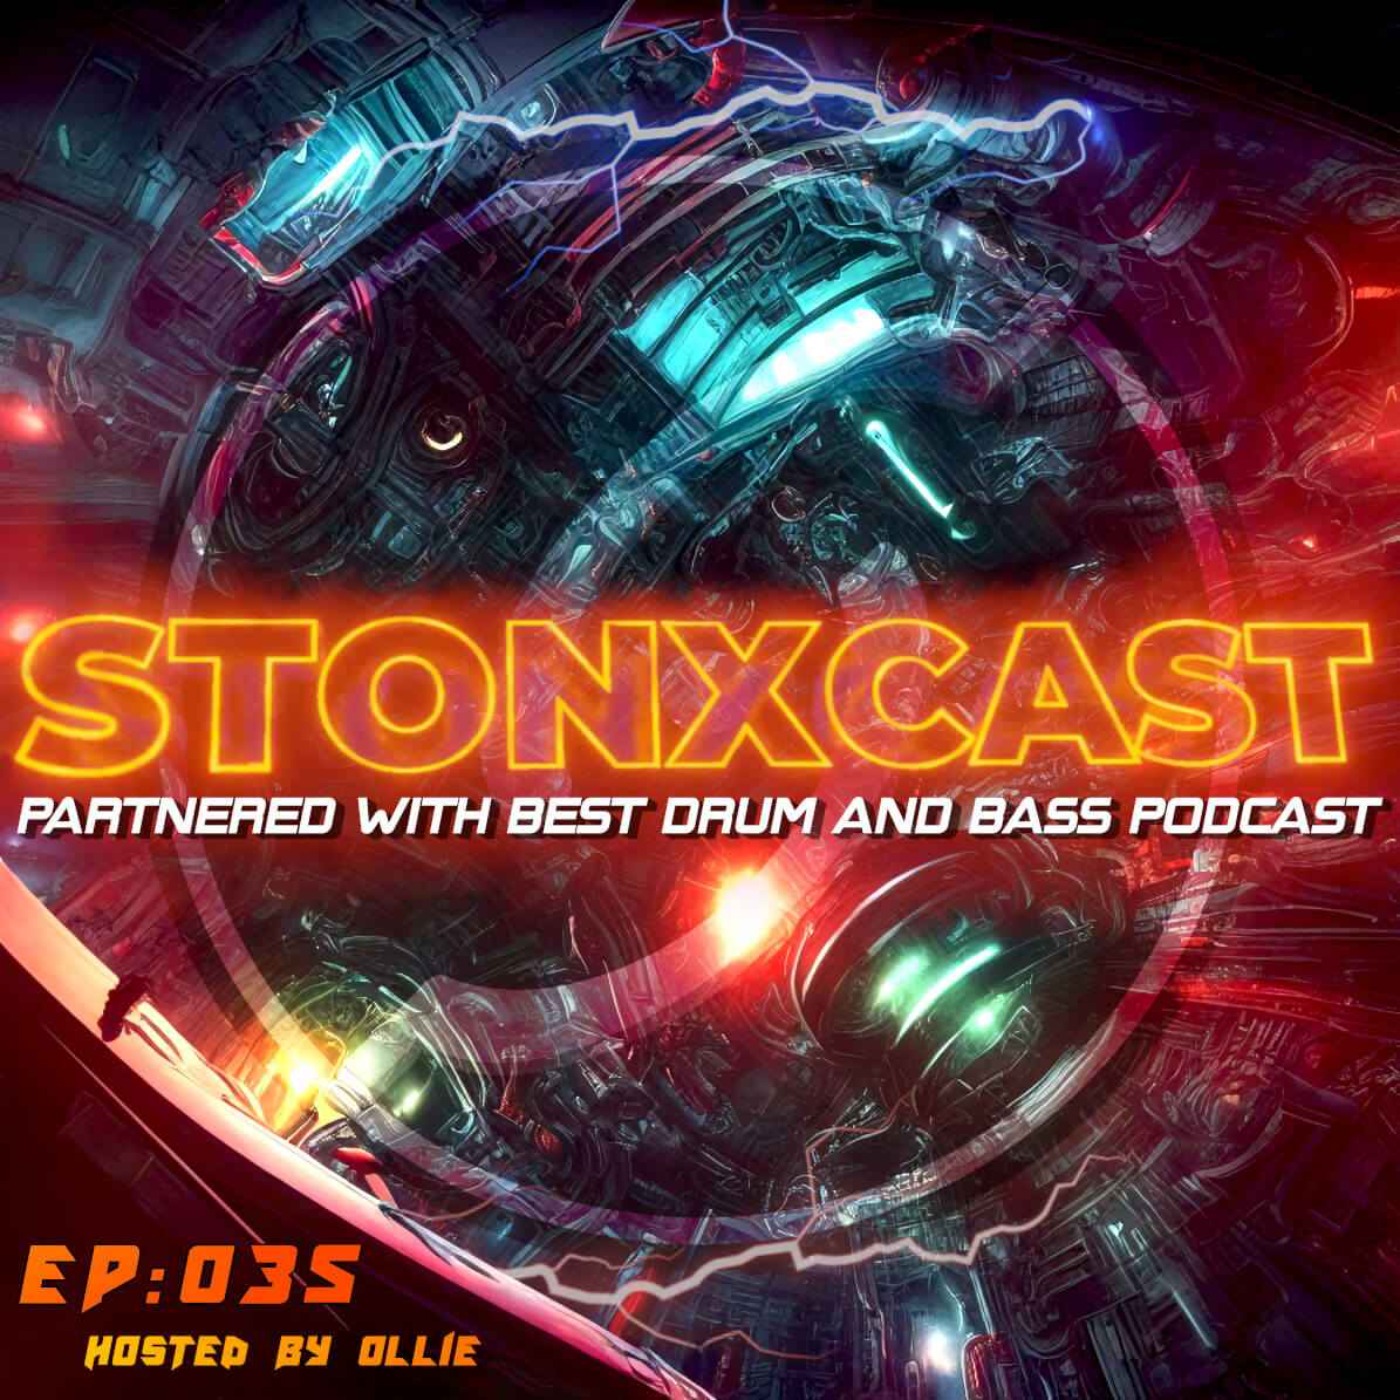 Stonxcast EP:035 - Hosted by Ollie  Artwork